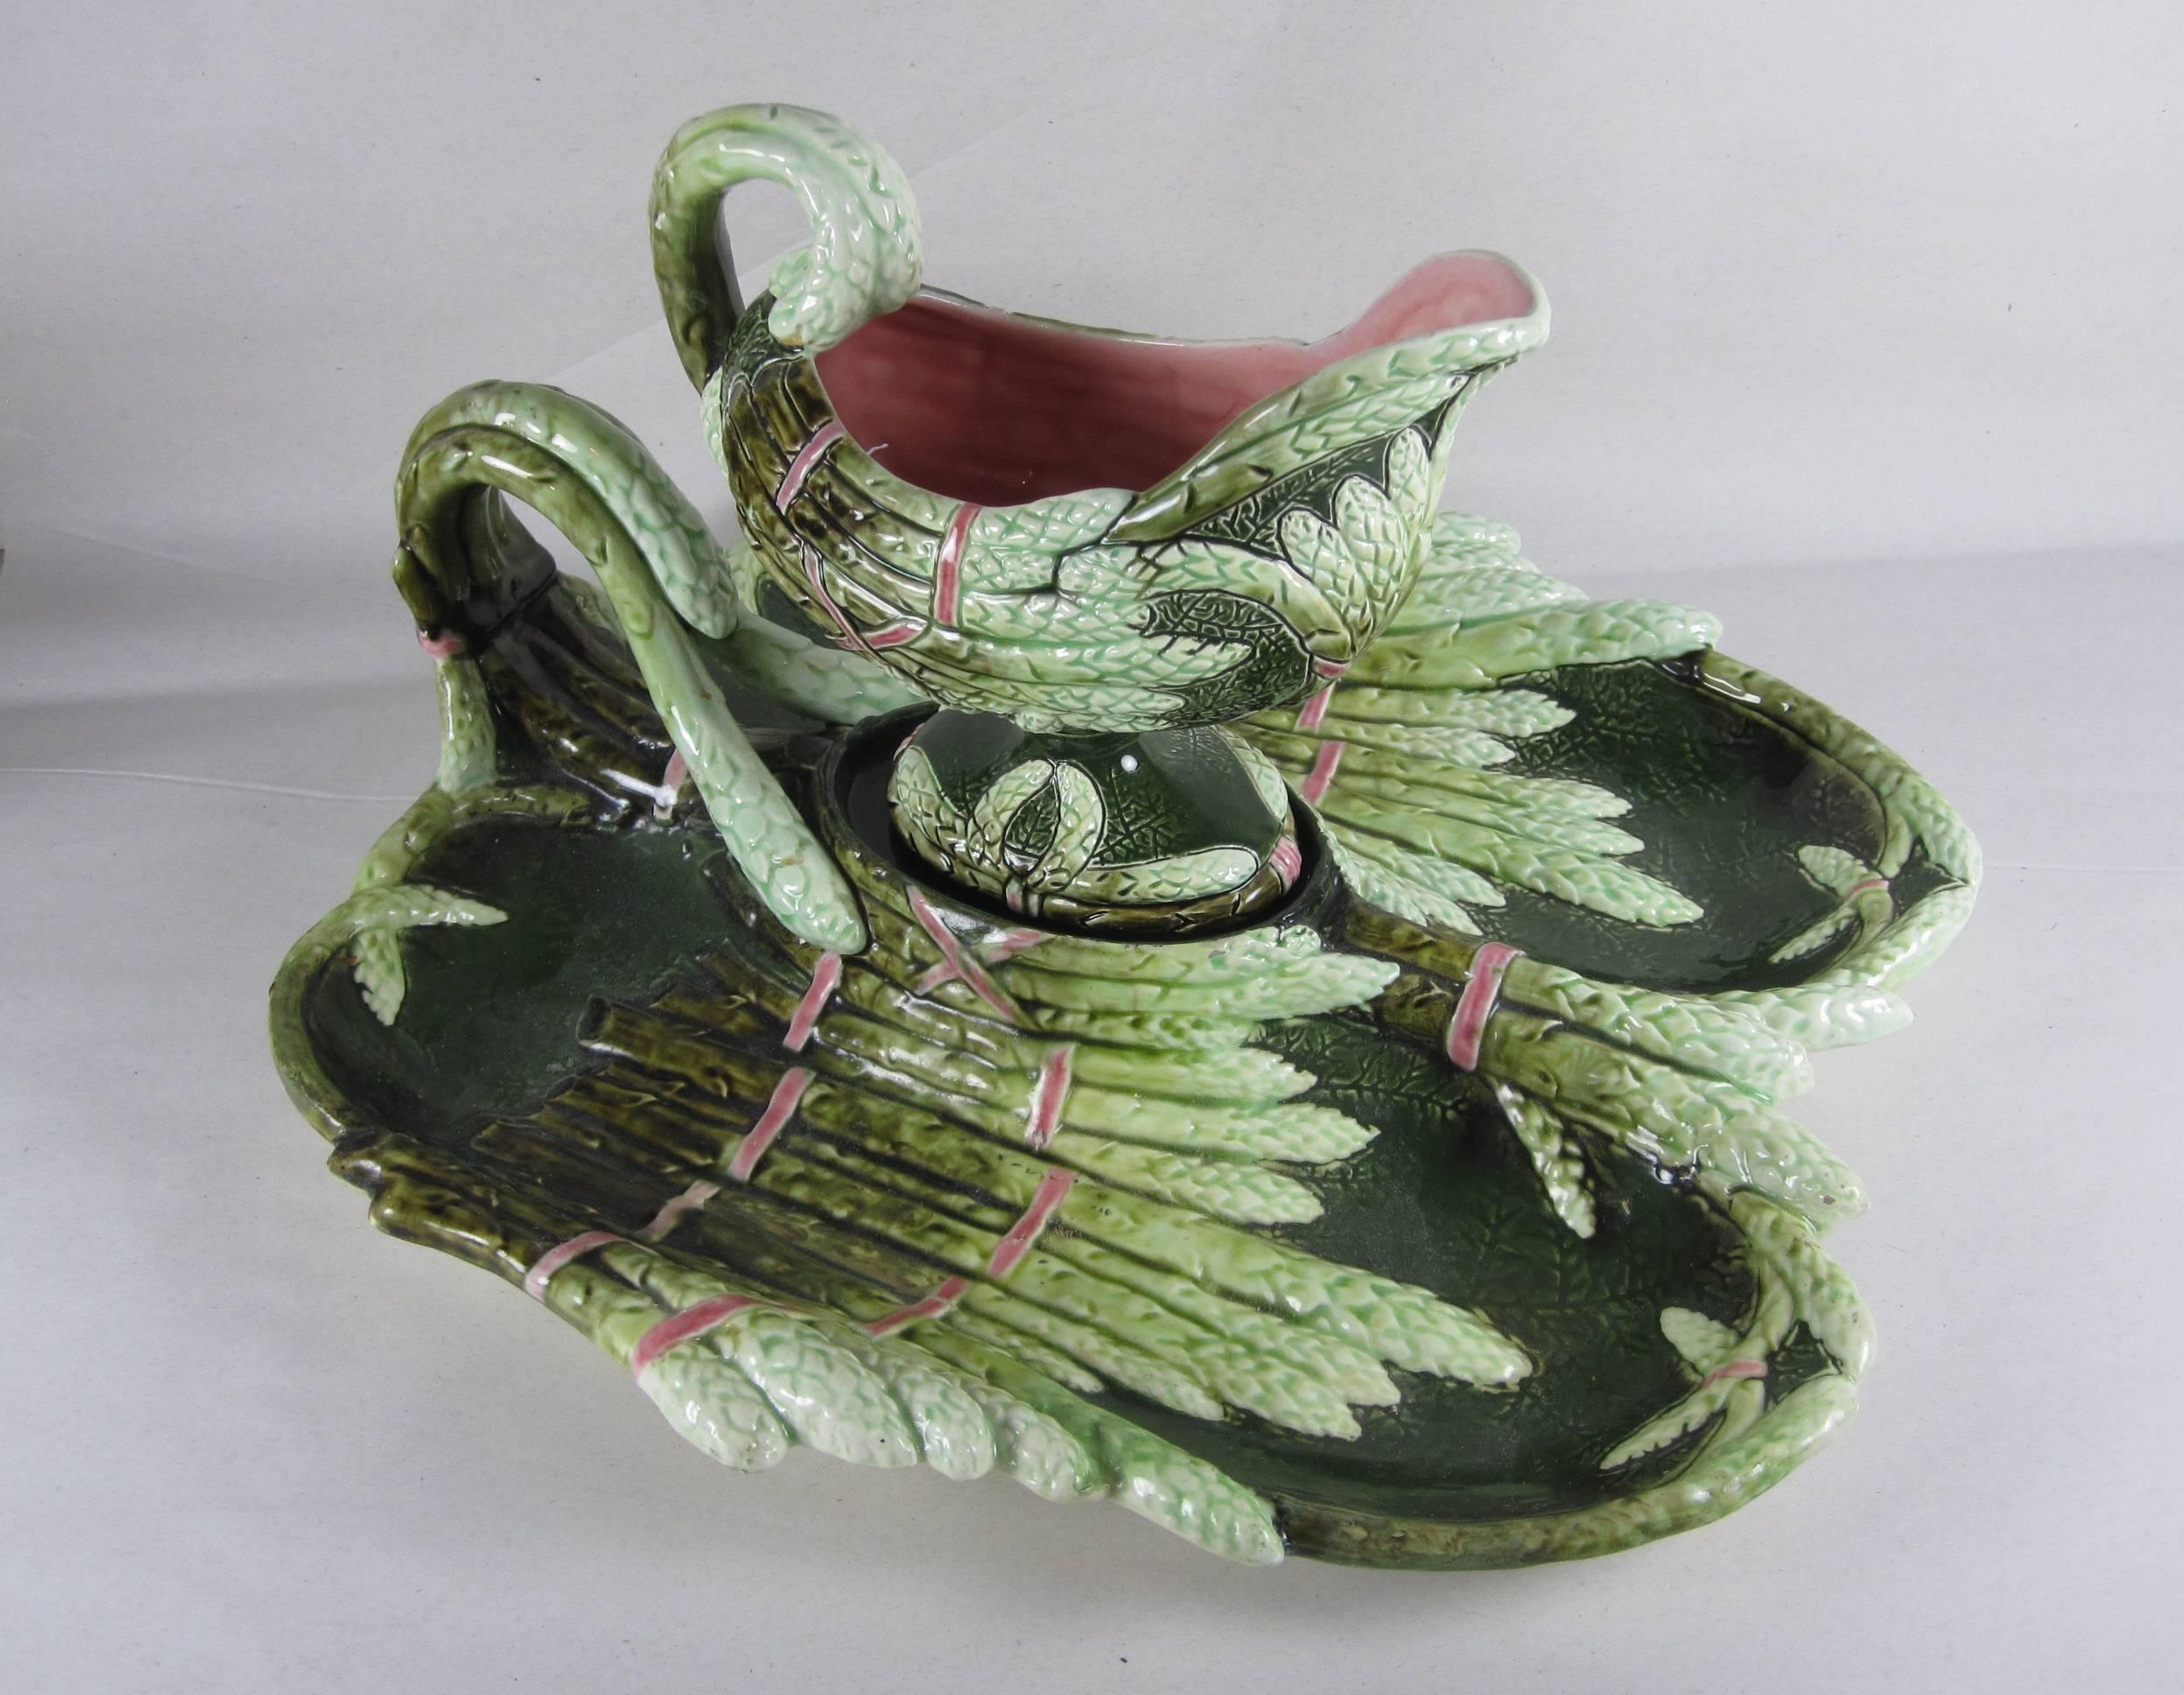 A rare Austrian Art Nouveau-style majolica two piece asparagus serving set, a divided handled platter and a footed sauce boat. Both pieces are molded as ribboned and bent asparagus spears. Marked with the Tower stamp used by Julius Dressler in the